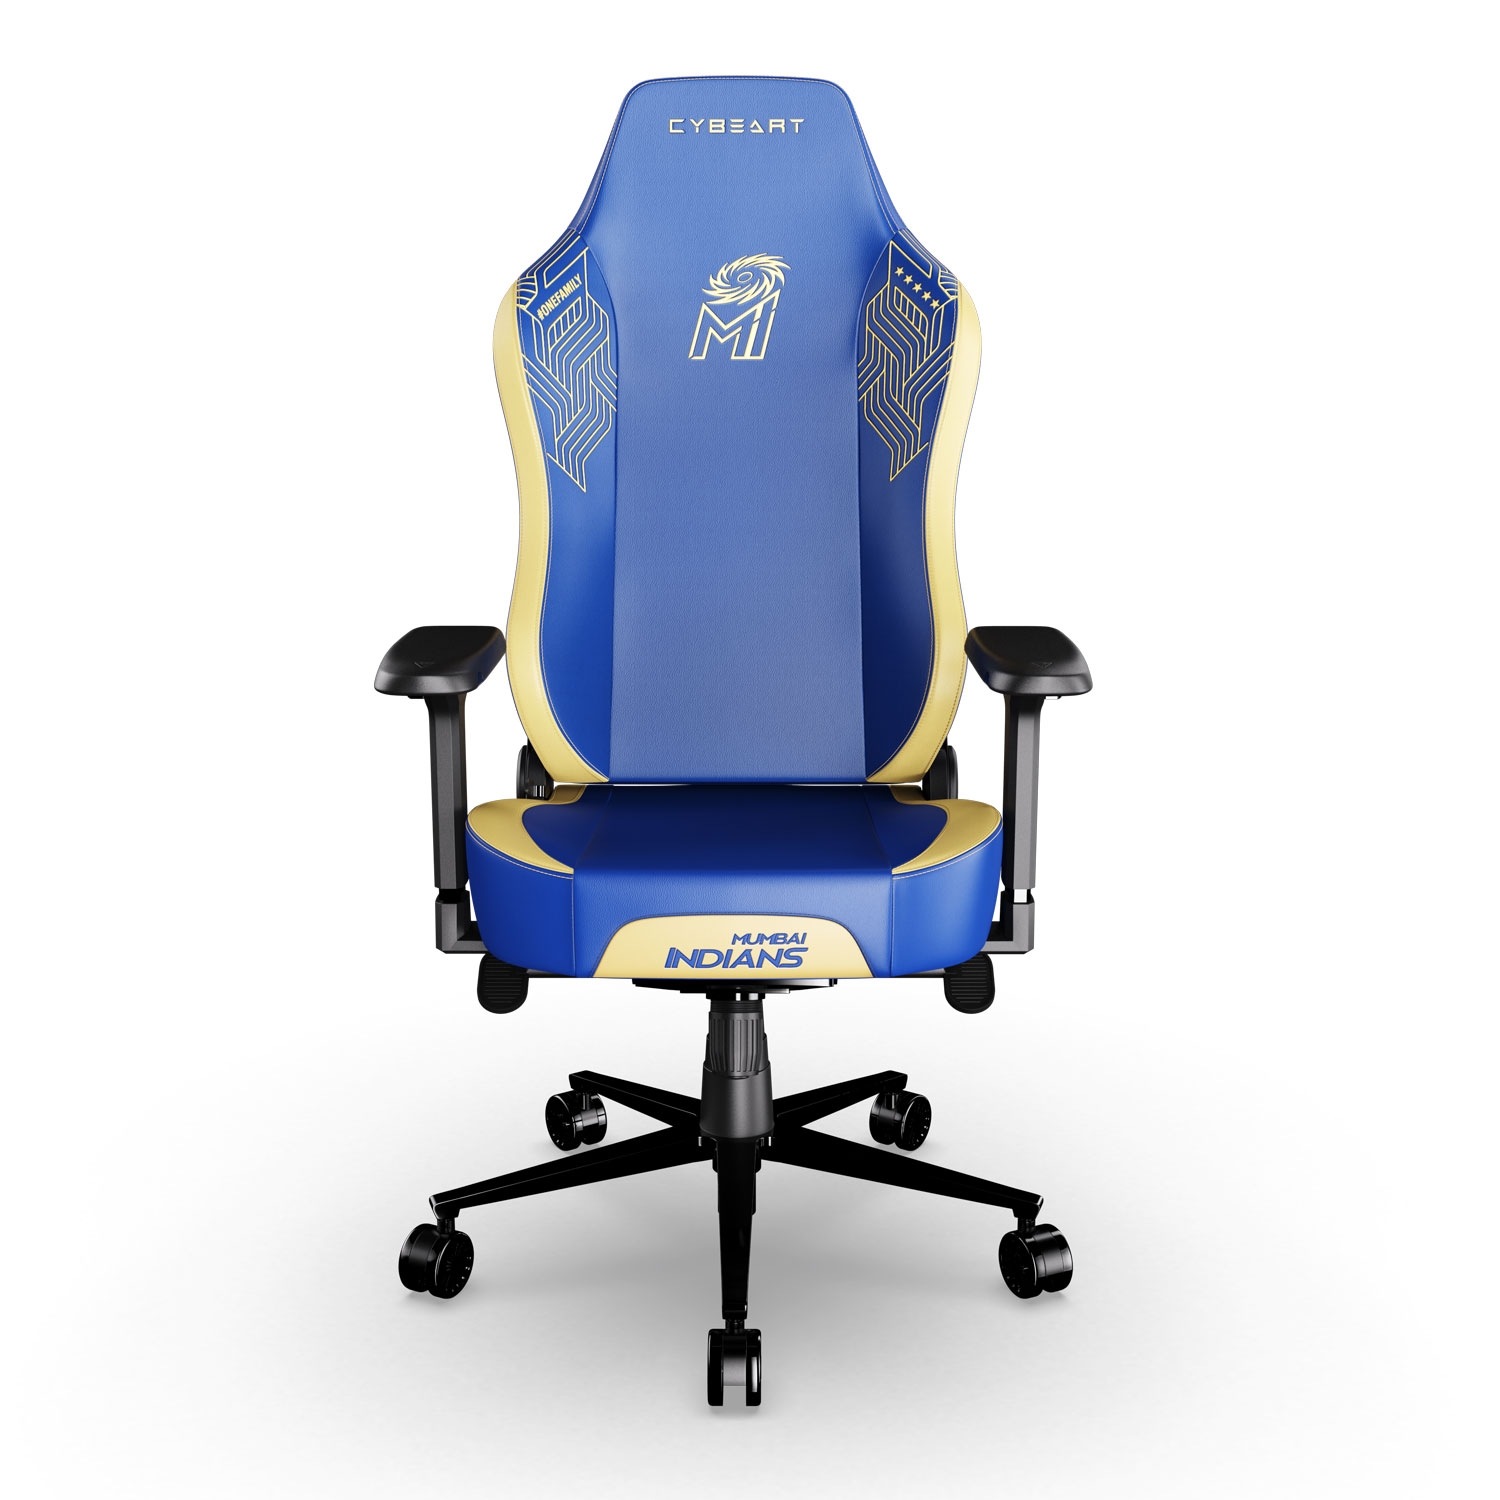 Cybeart | MI: Gaming Chair - Limited Edition